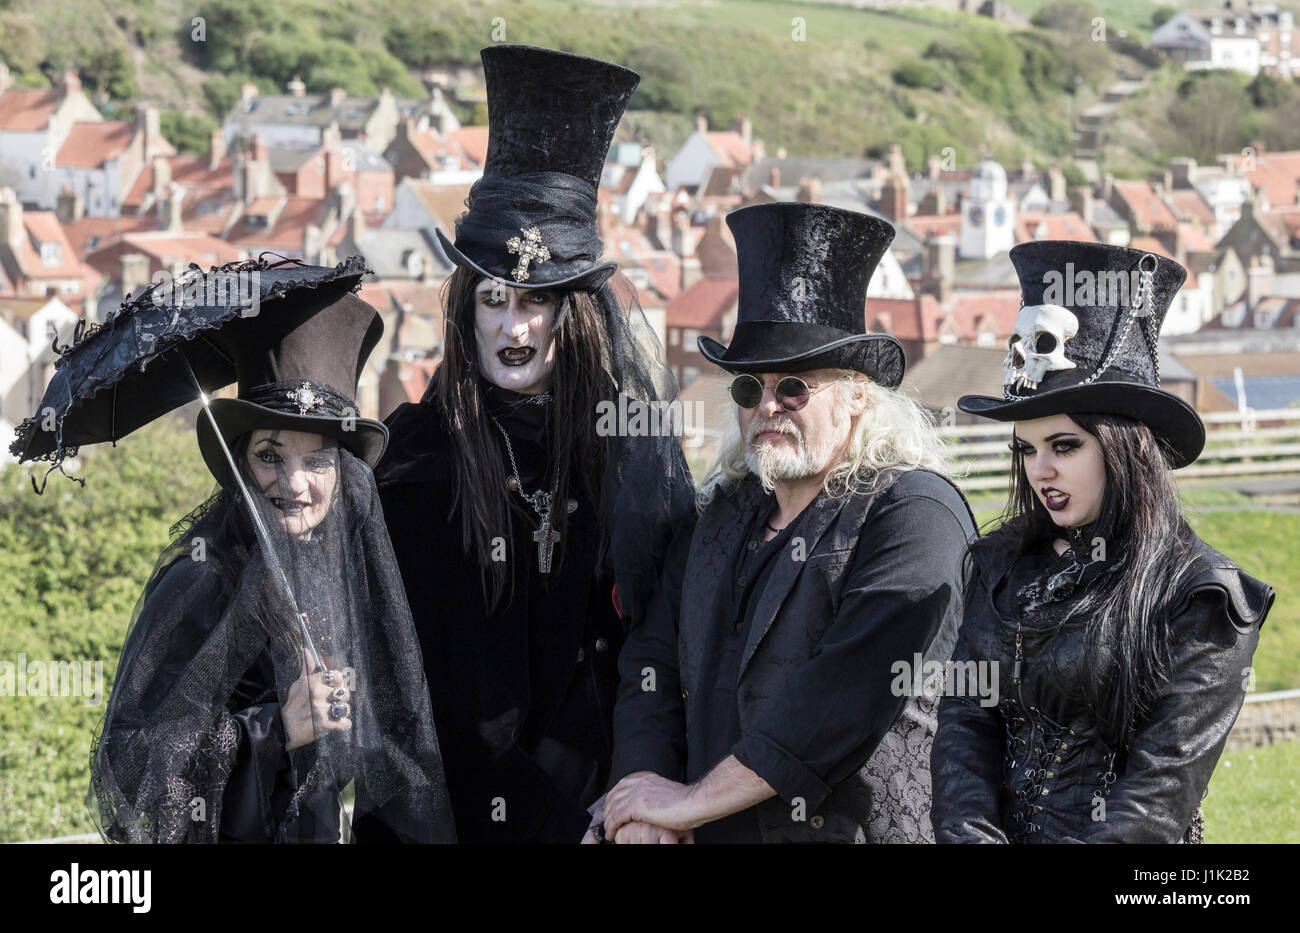 Whitby Goth weekend, Whitby, North Yorkshire, England. UK Stock Photo